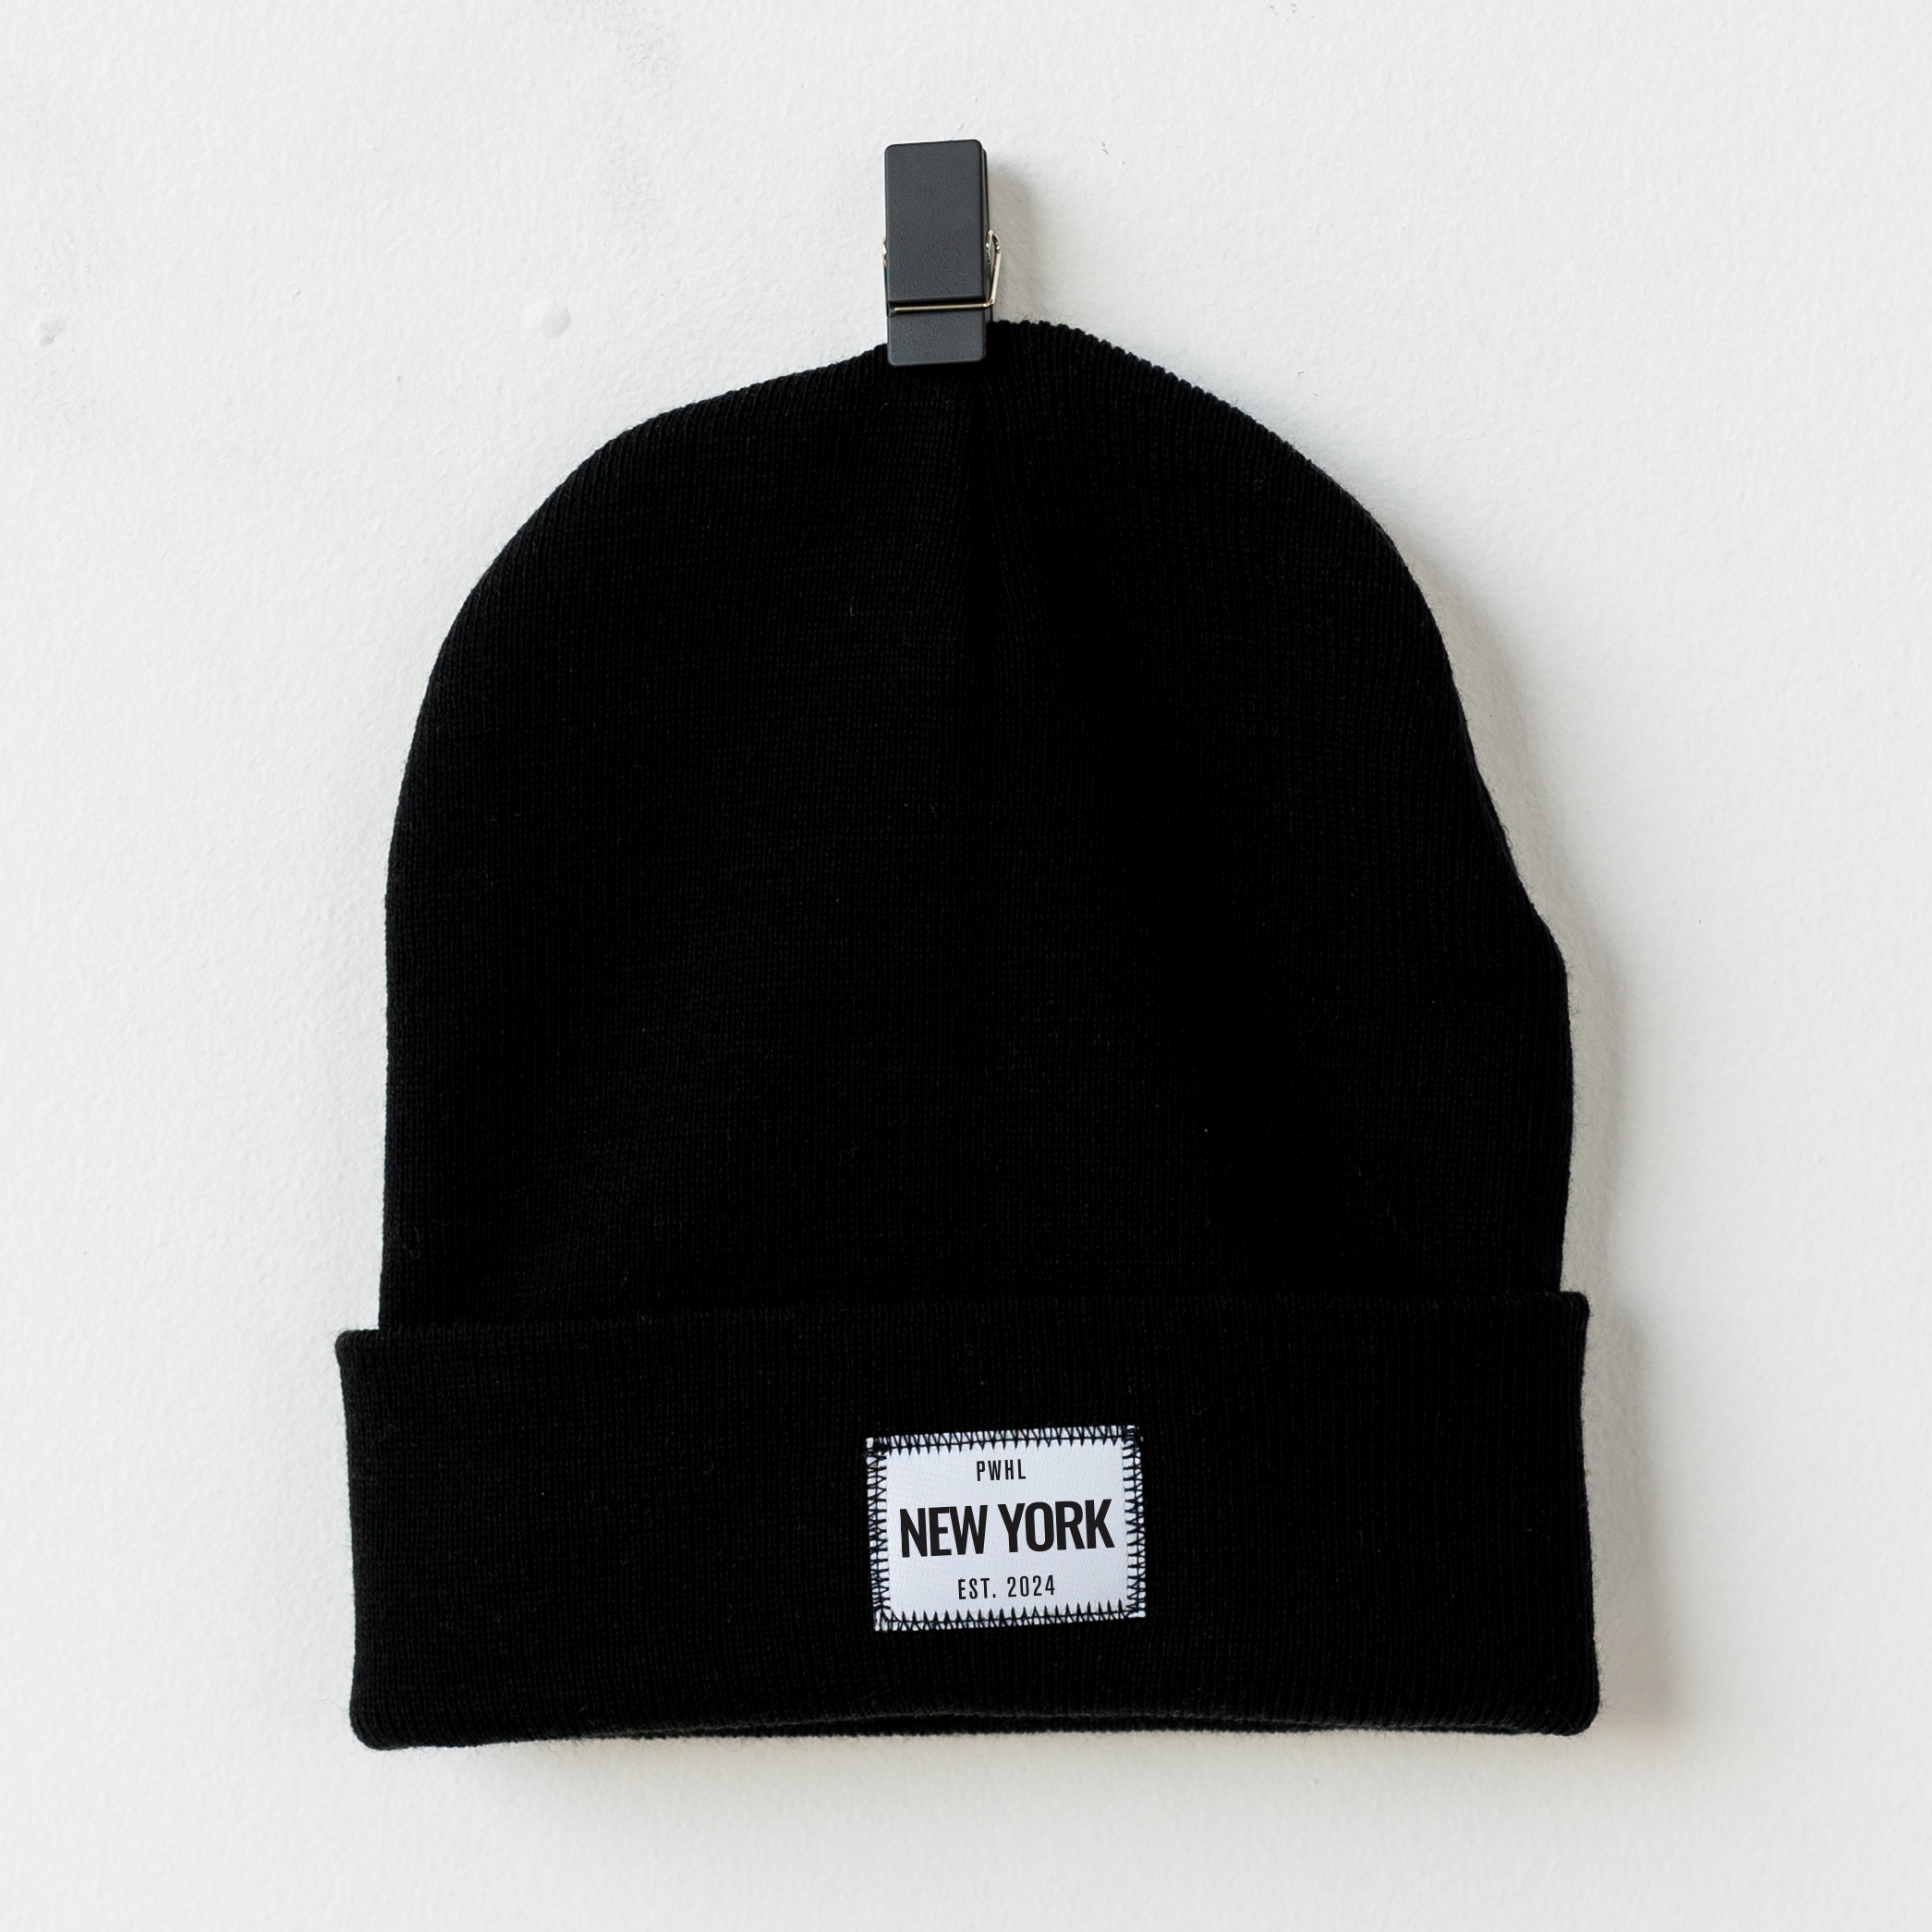 PWHL the York Shop Official of New – The Toque/Beanie